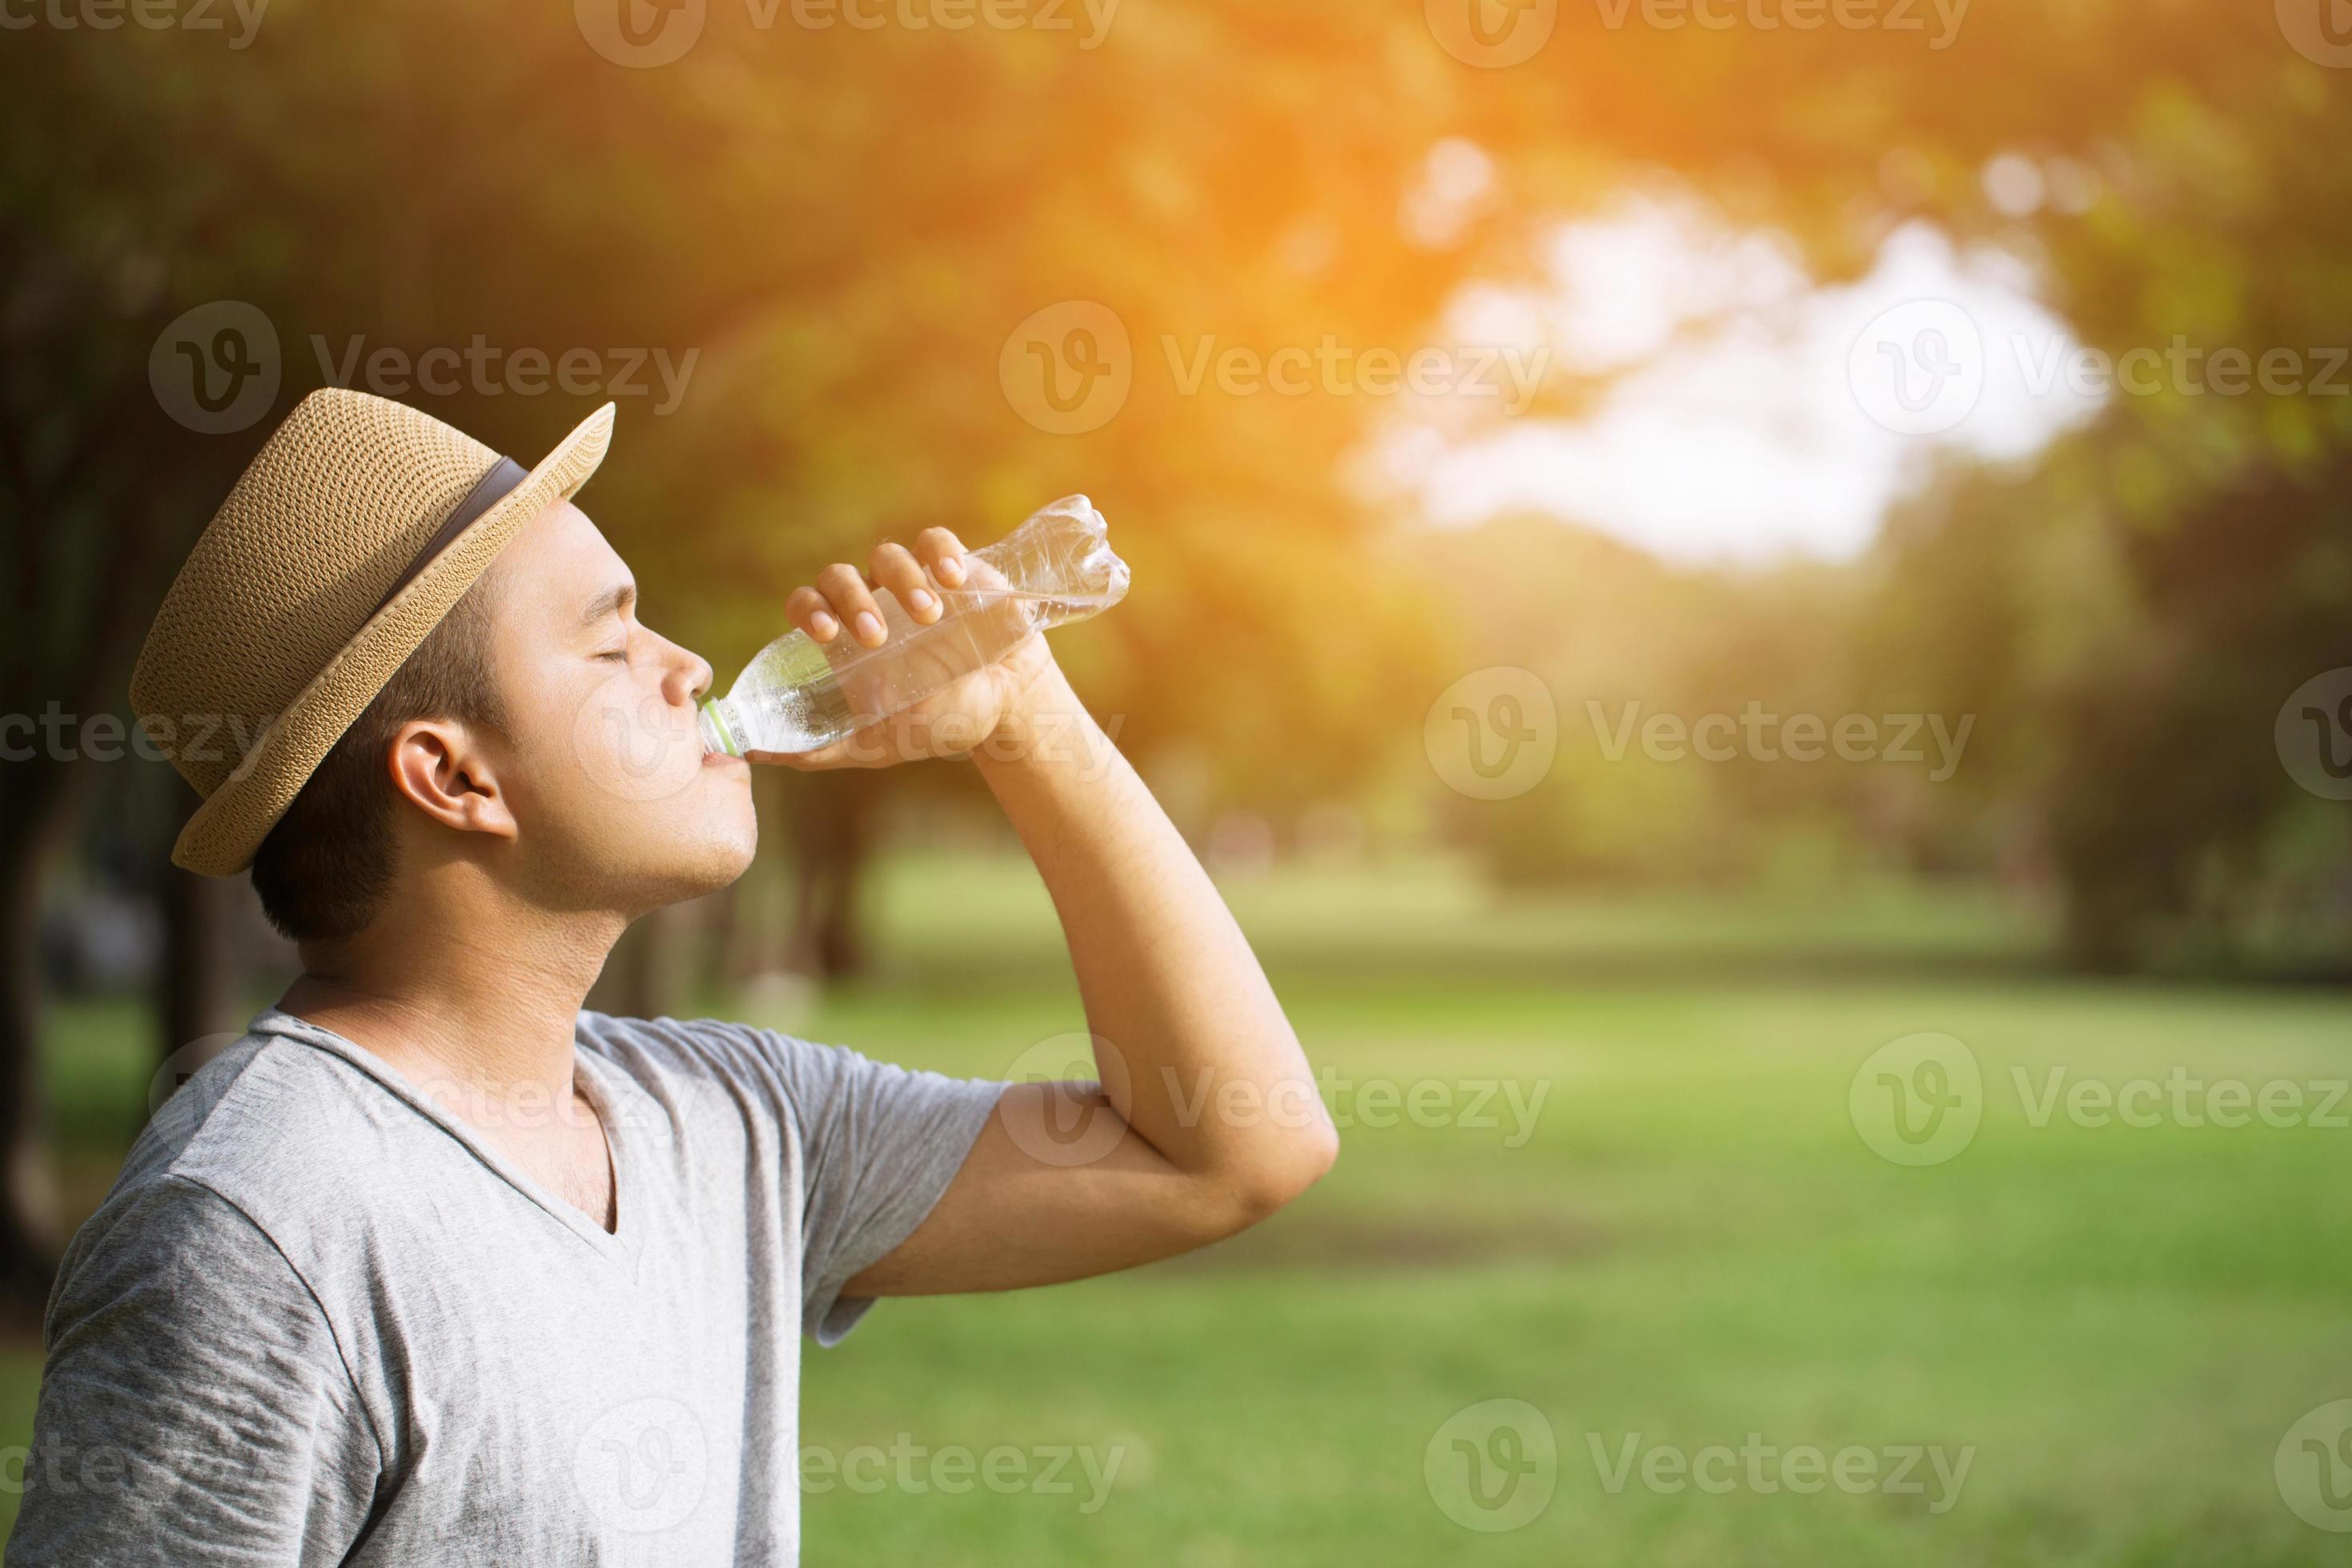 https://static.vecteezy.com/system/resources/previews/012/775/083/large_2x/close-up-young-man-hand-holding-cool-fresh-drinking-water-bottle-from-a-plastic-photo.JPG